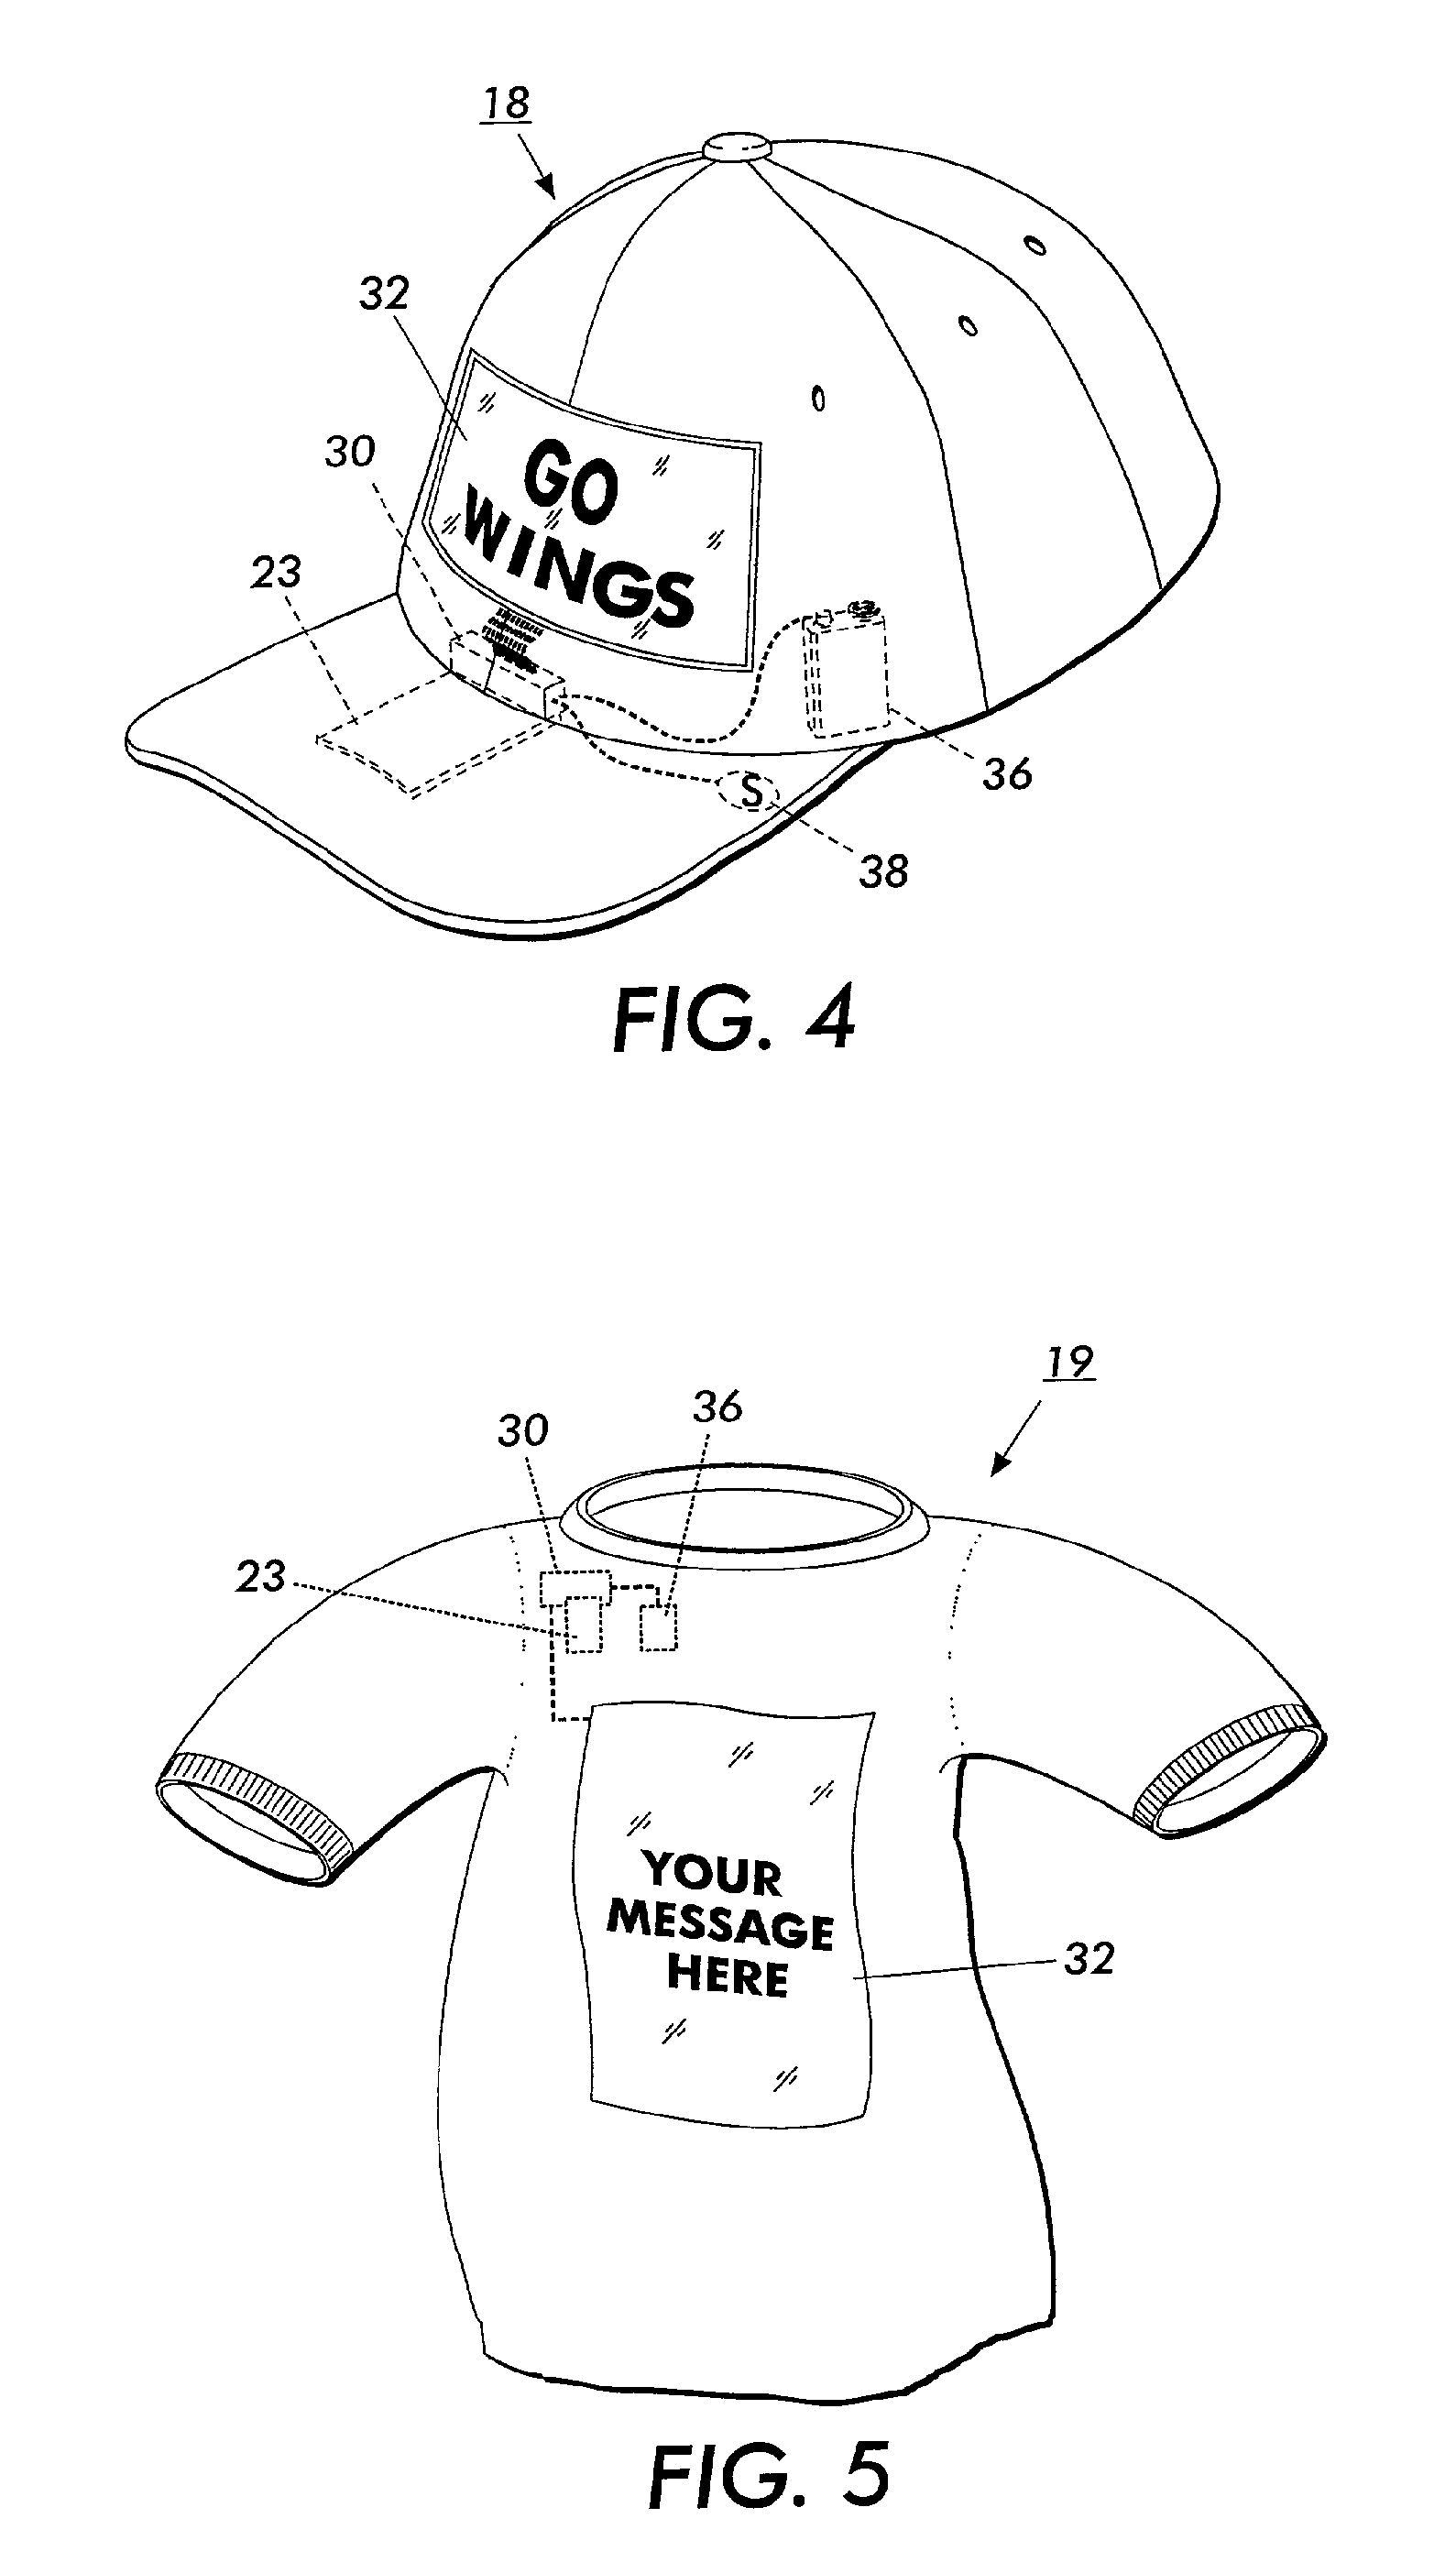 Apparatus for the display of embedded information